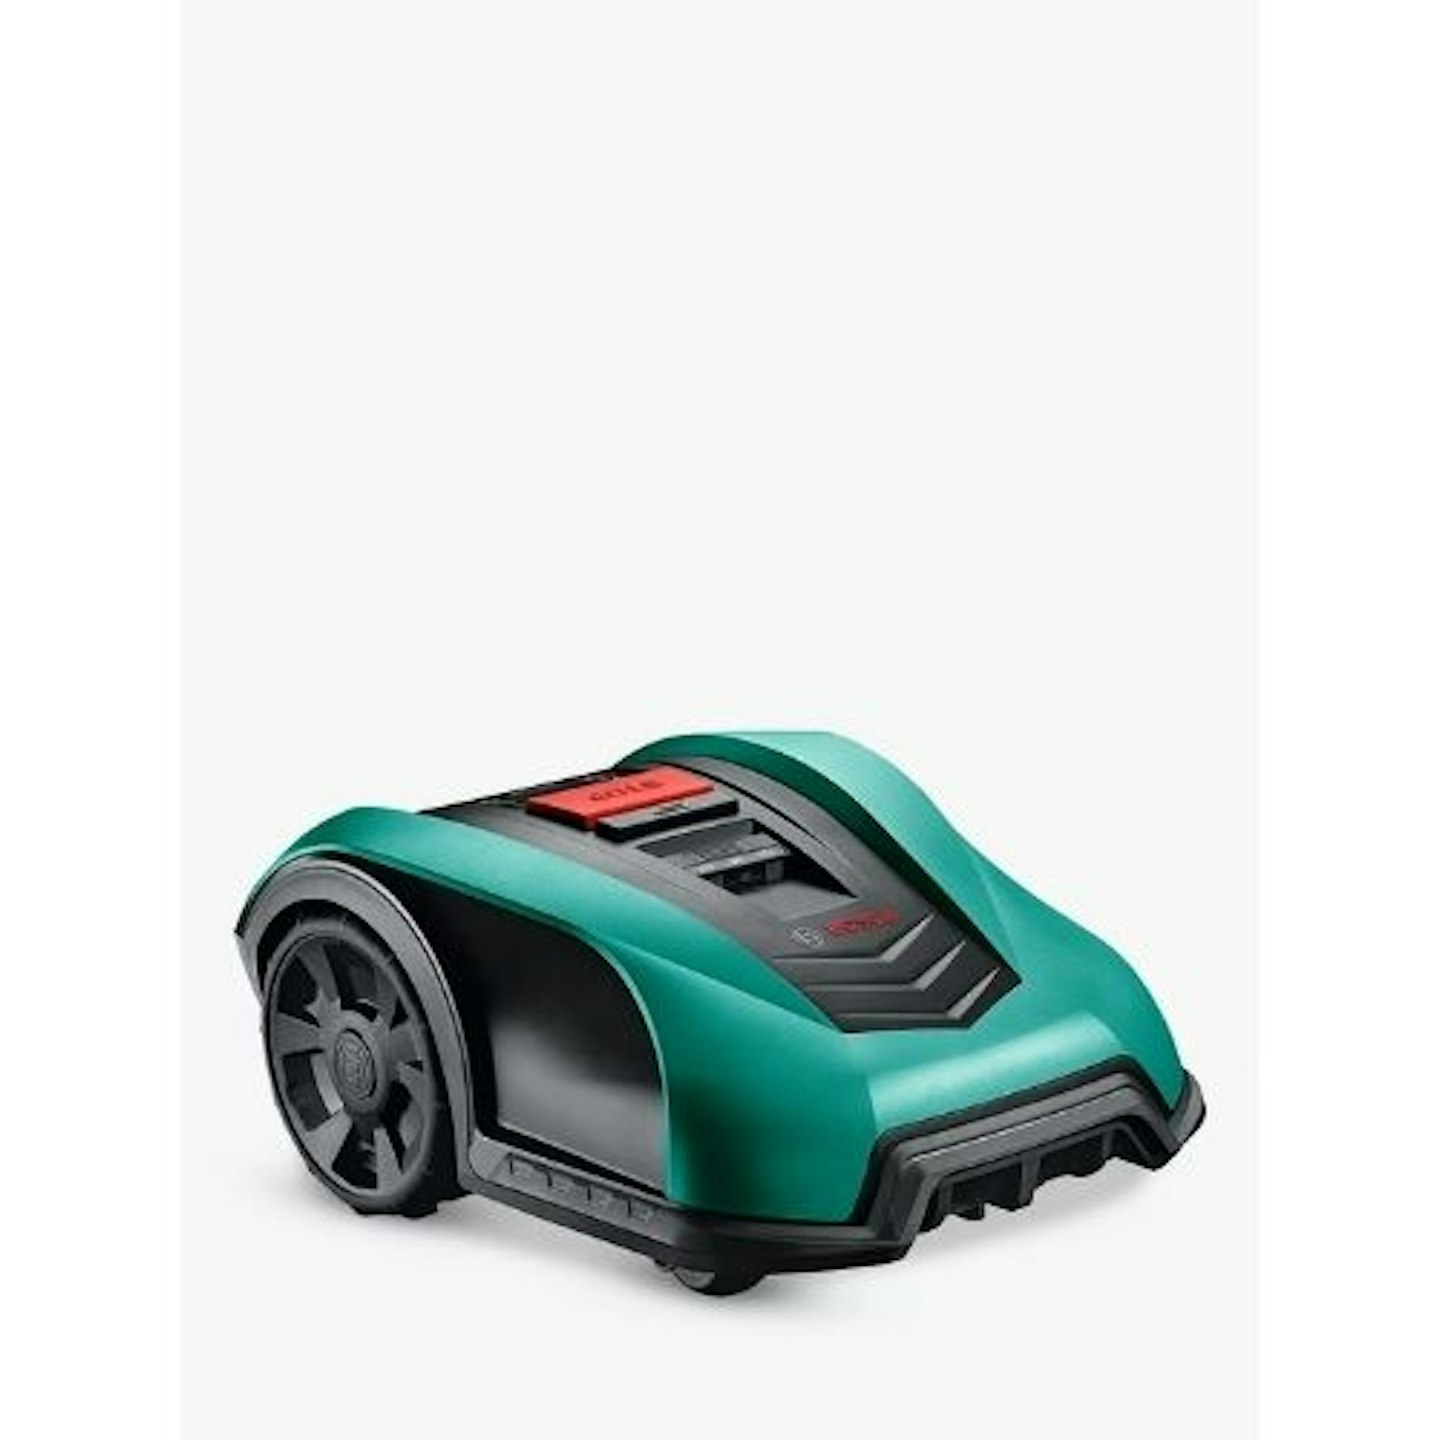 Bosch Indego 350 Connect Robotic Lawnmower